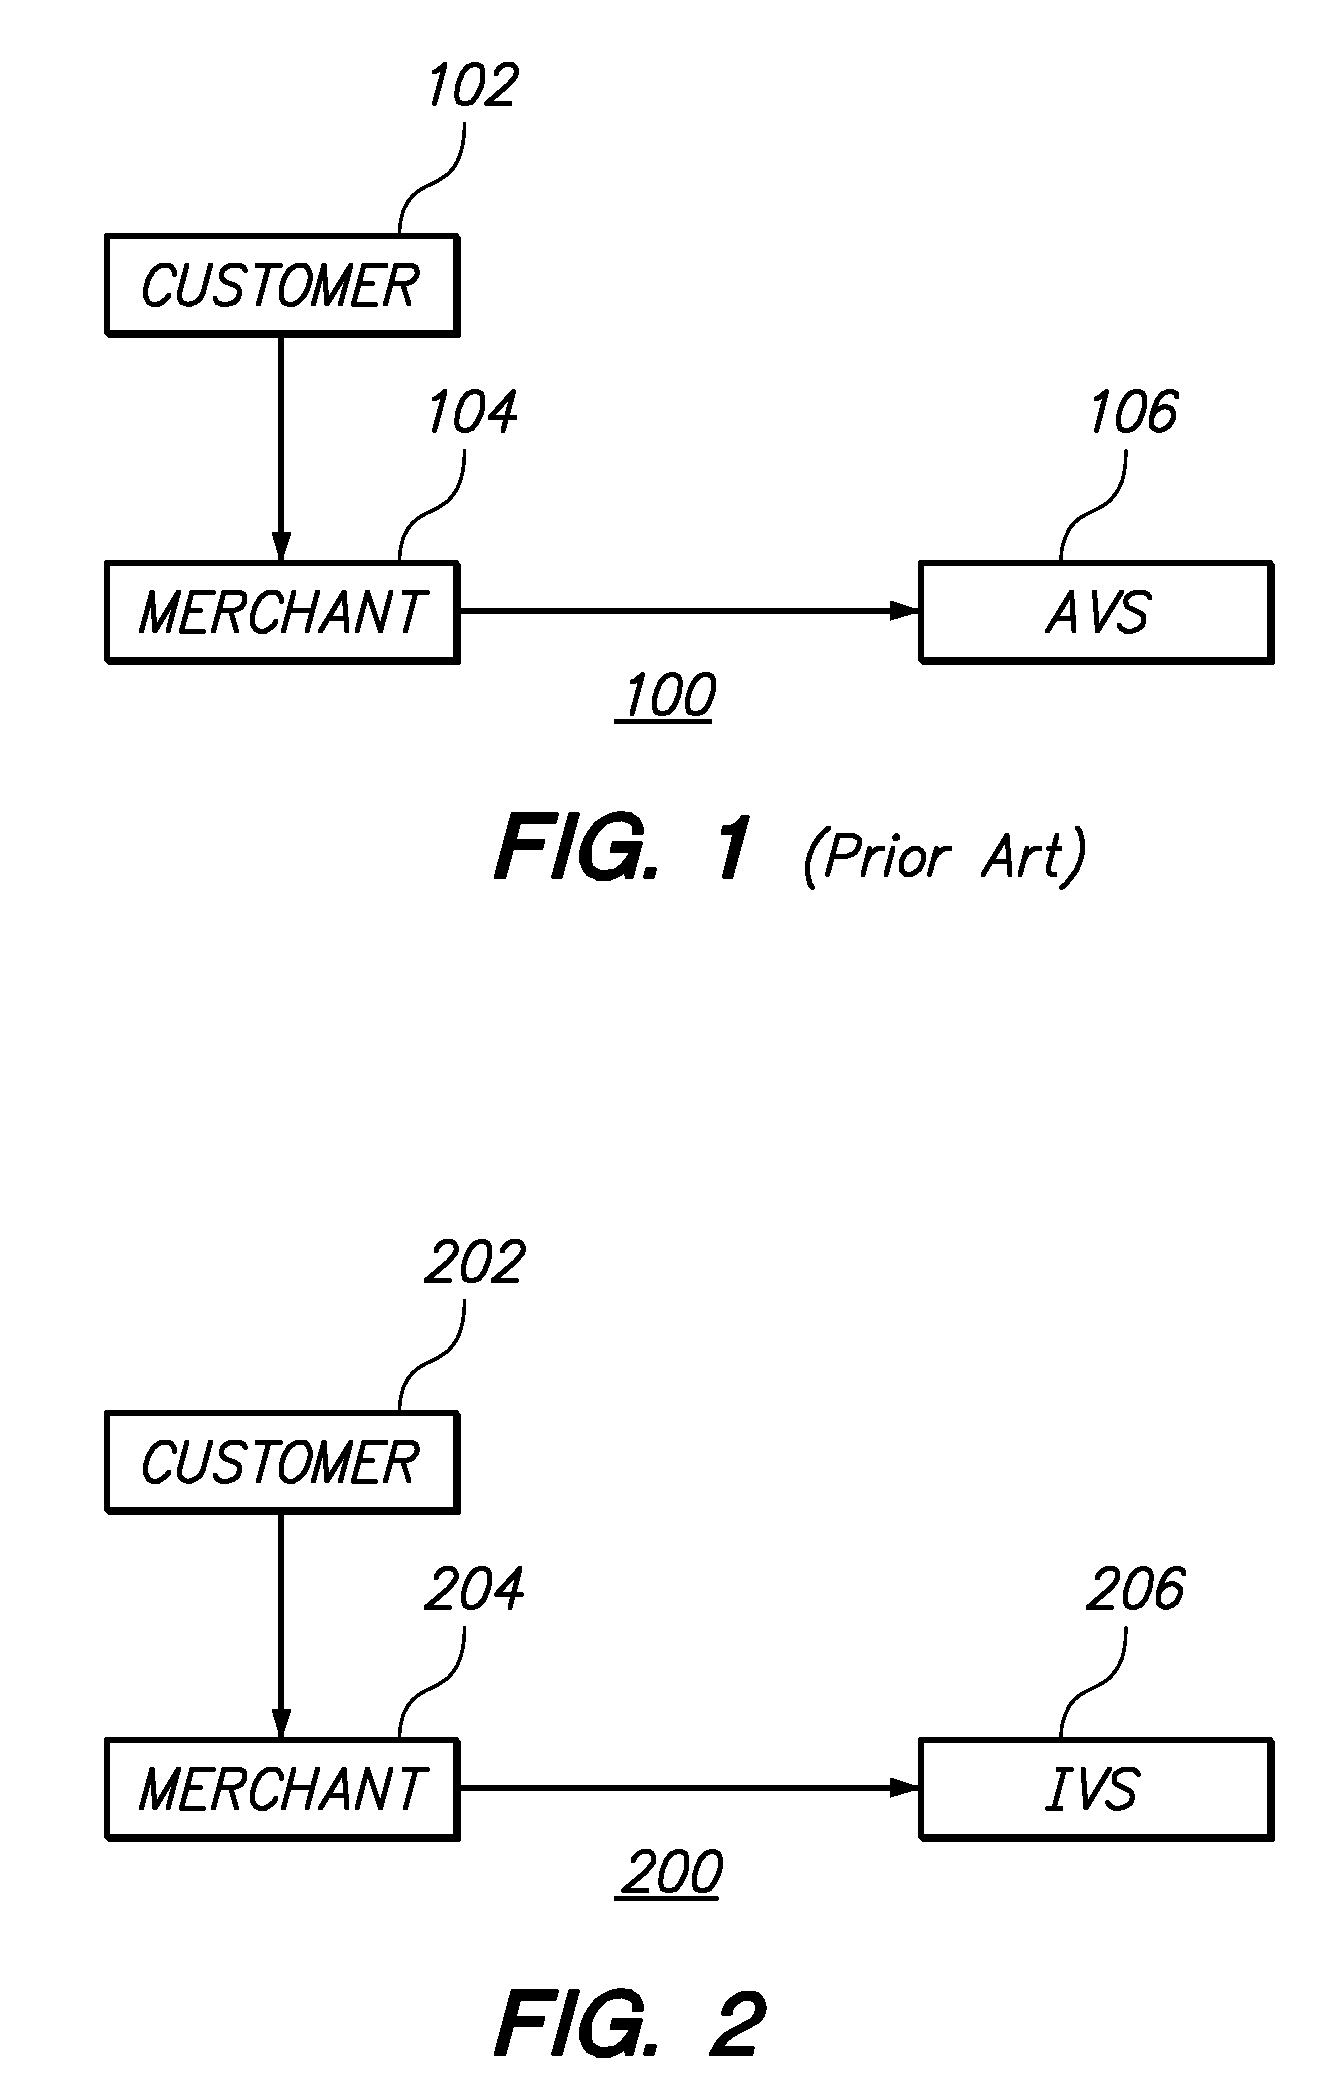 Method and Apparatus for Evaluating Fraud Risk in an Electronic Commerce Transaction